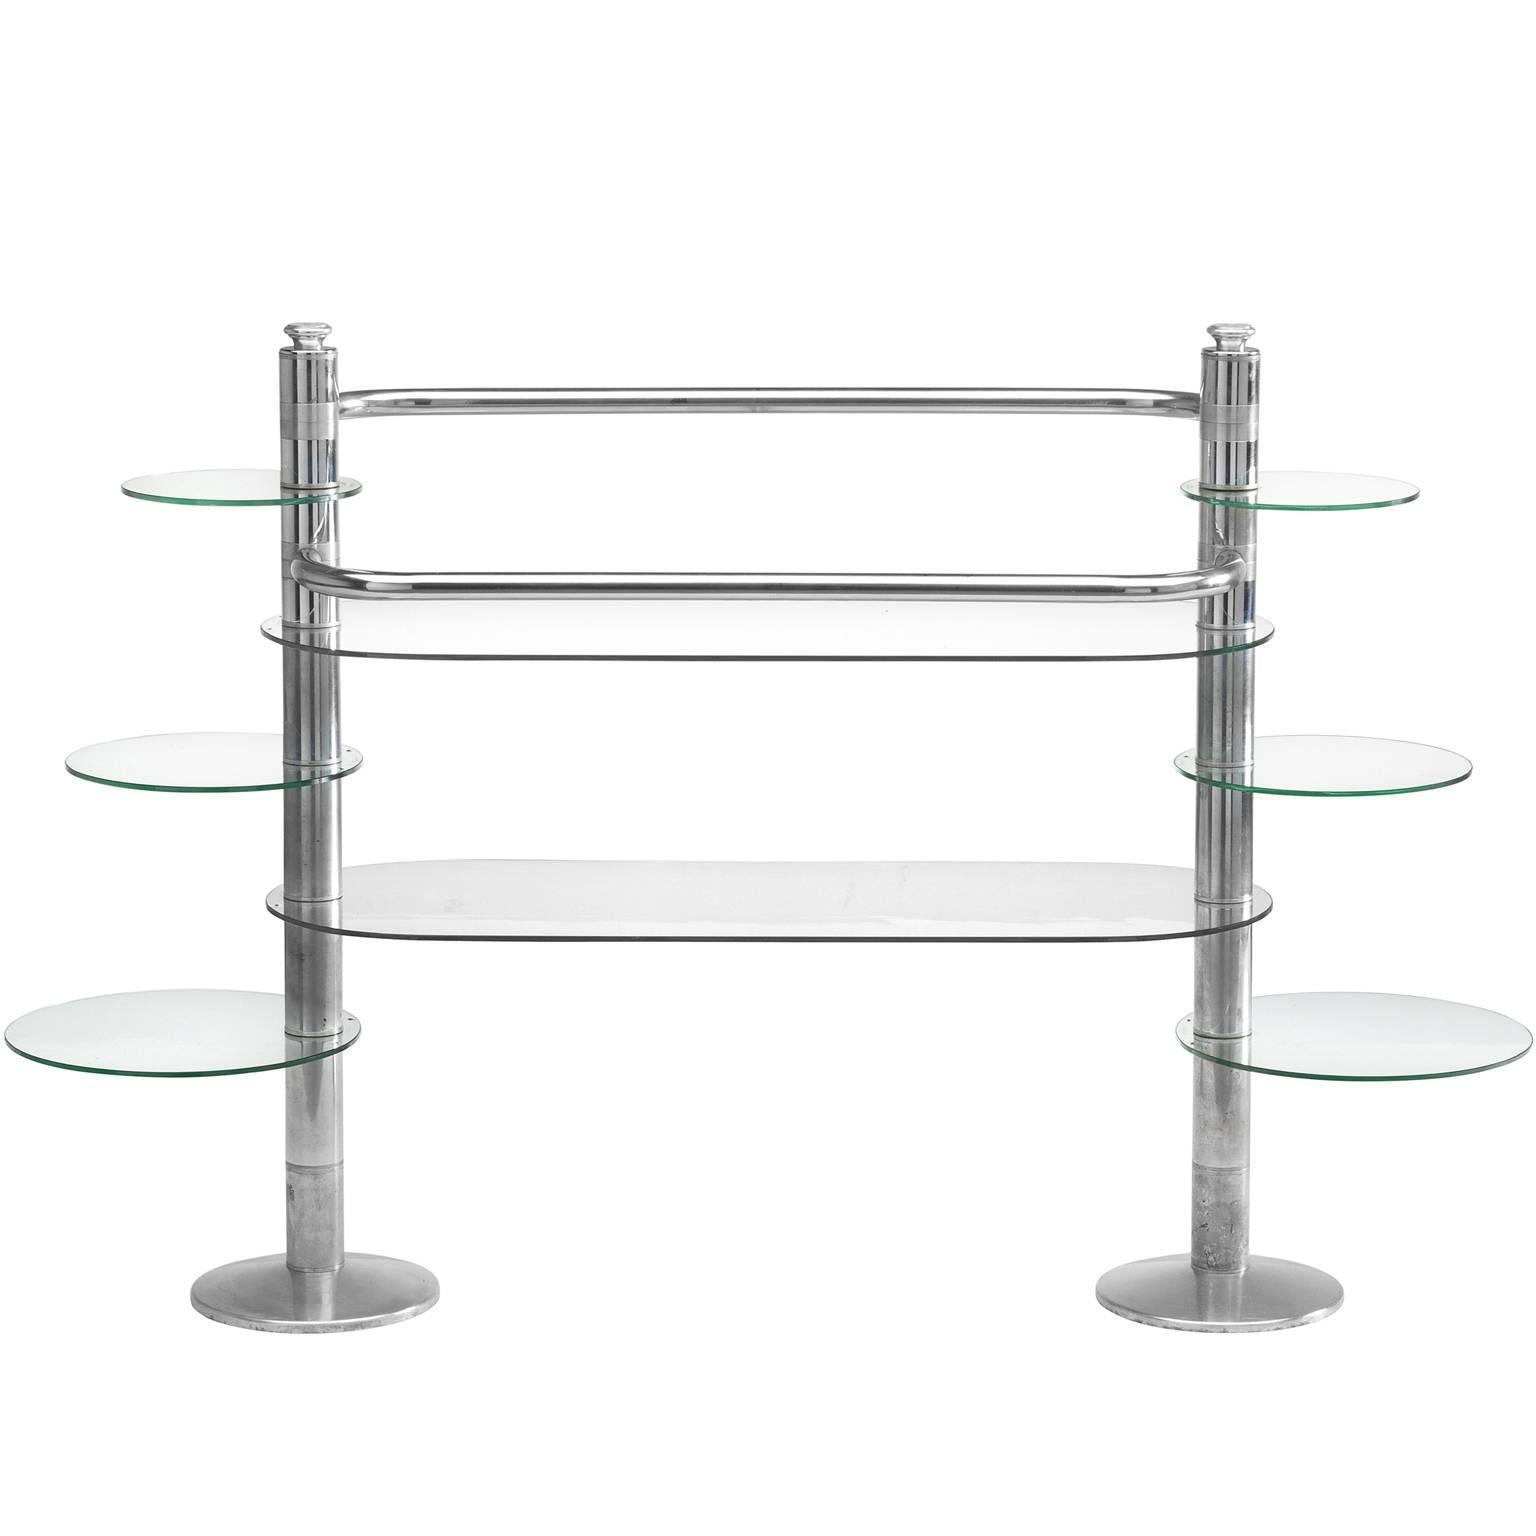 Display Unit in Chrome and Glass, Italy, 1980s